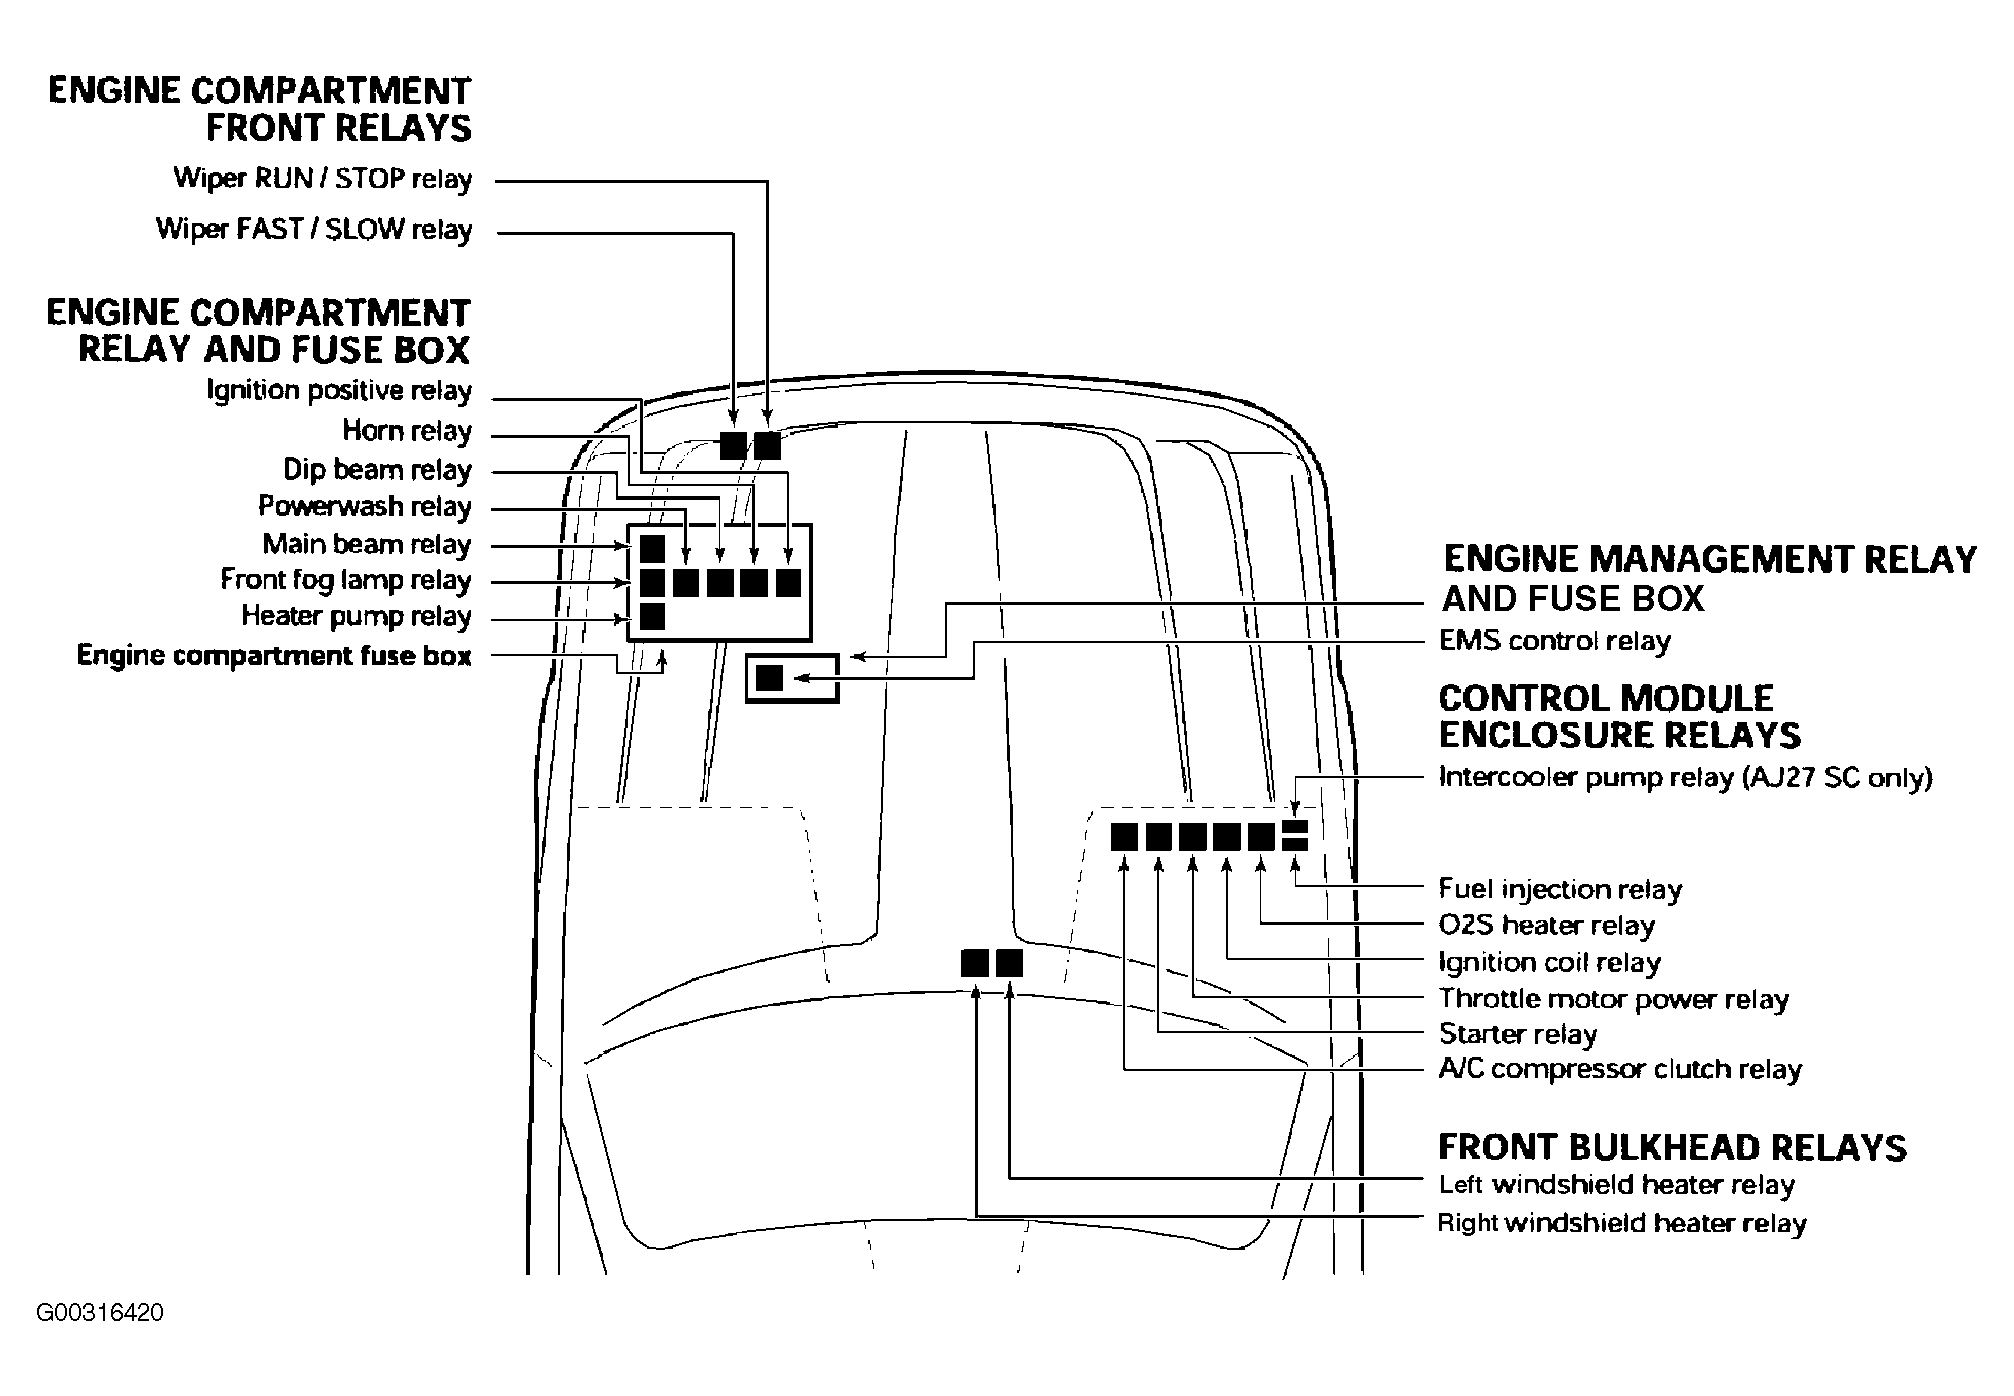 Jaguar XJ8 2003 - Component Locations -  Identifying Engine Compartment Fuse/Relay Locations